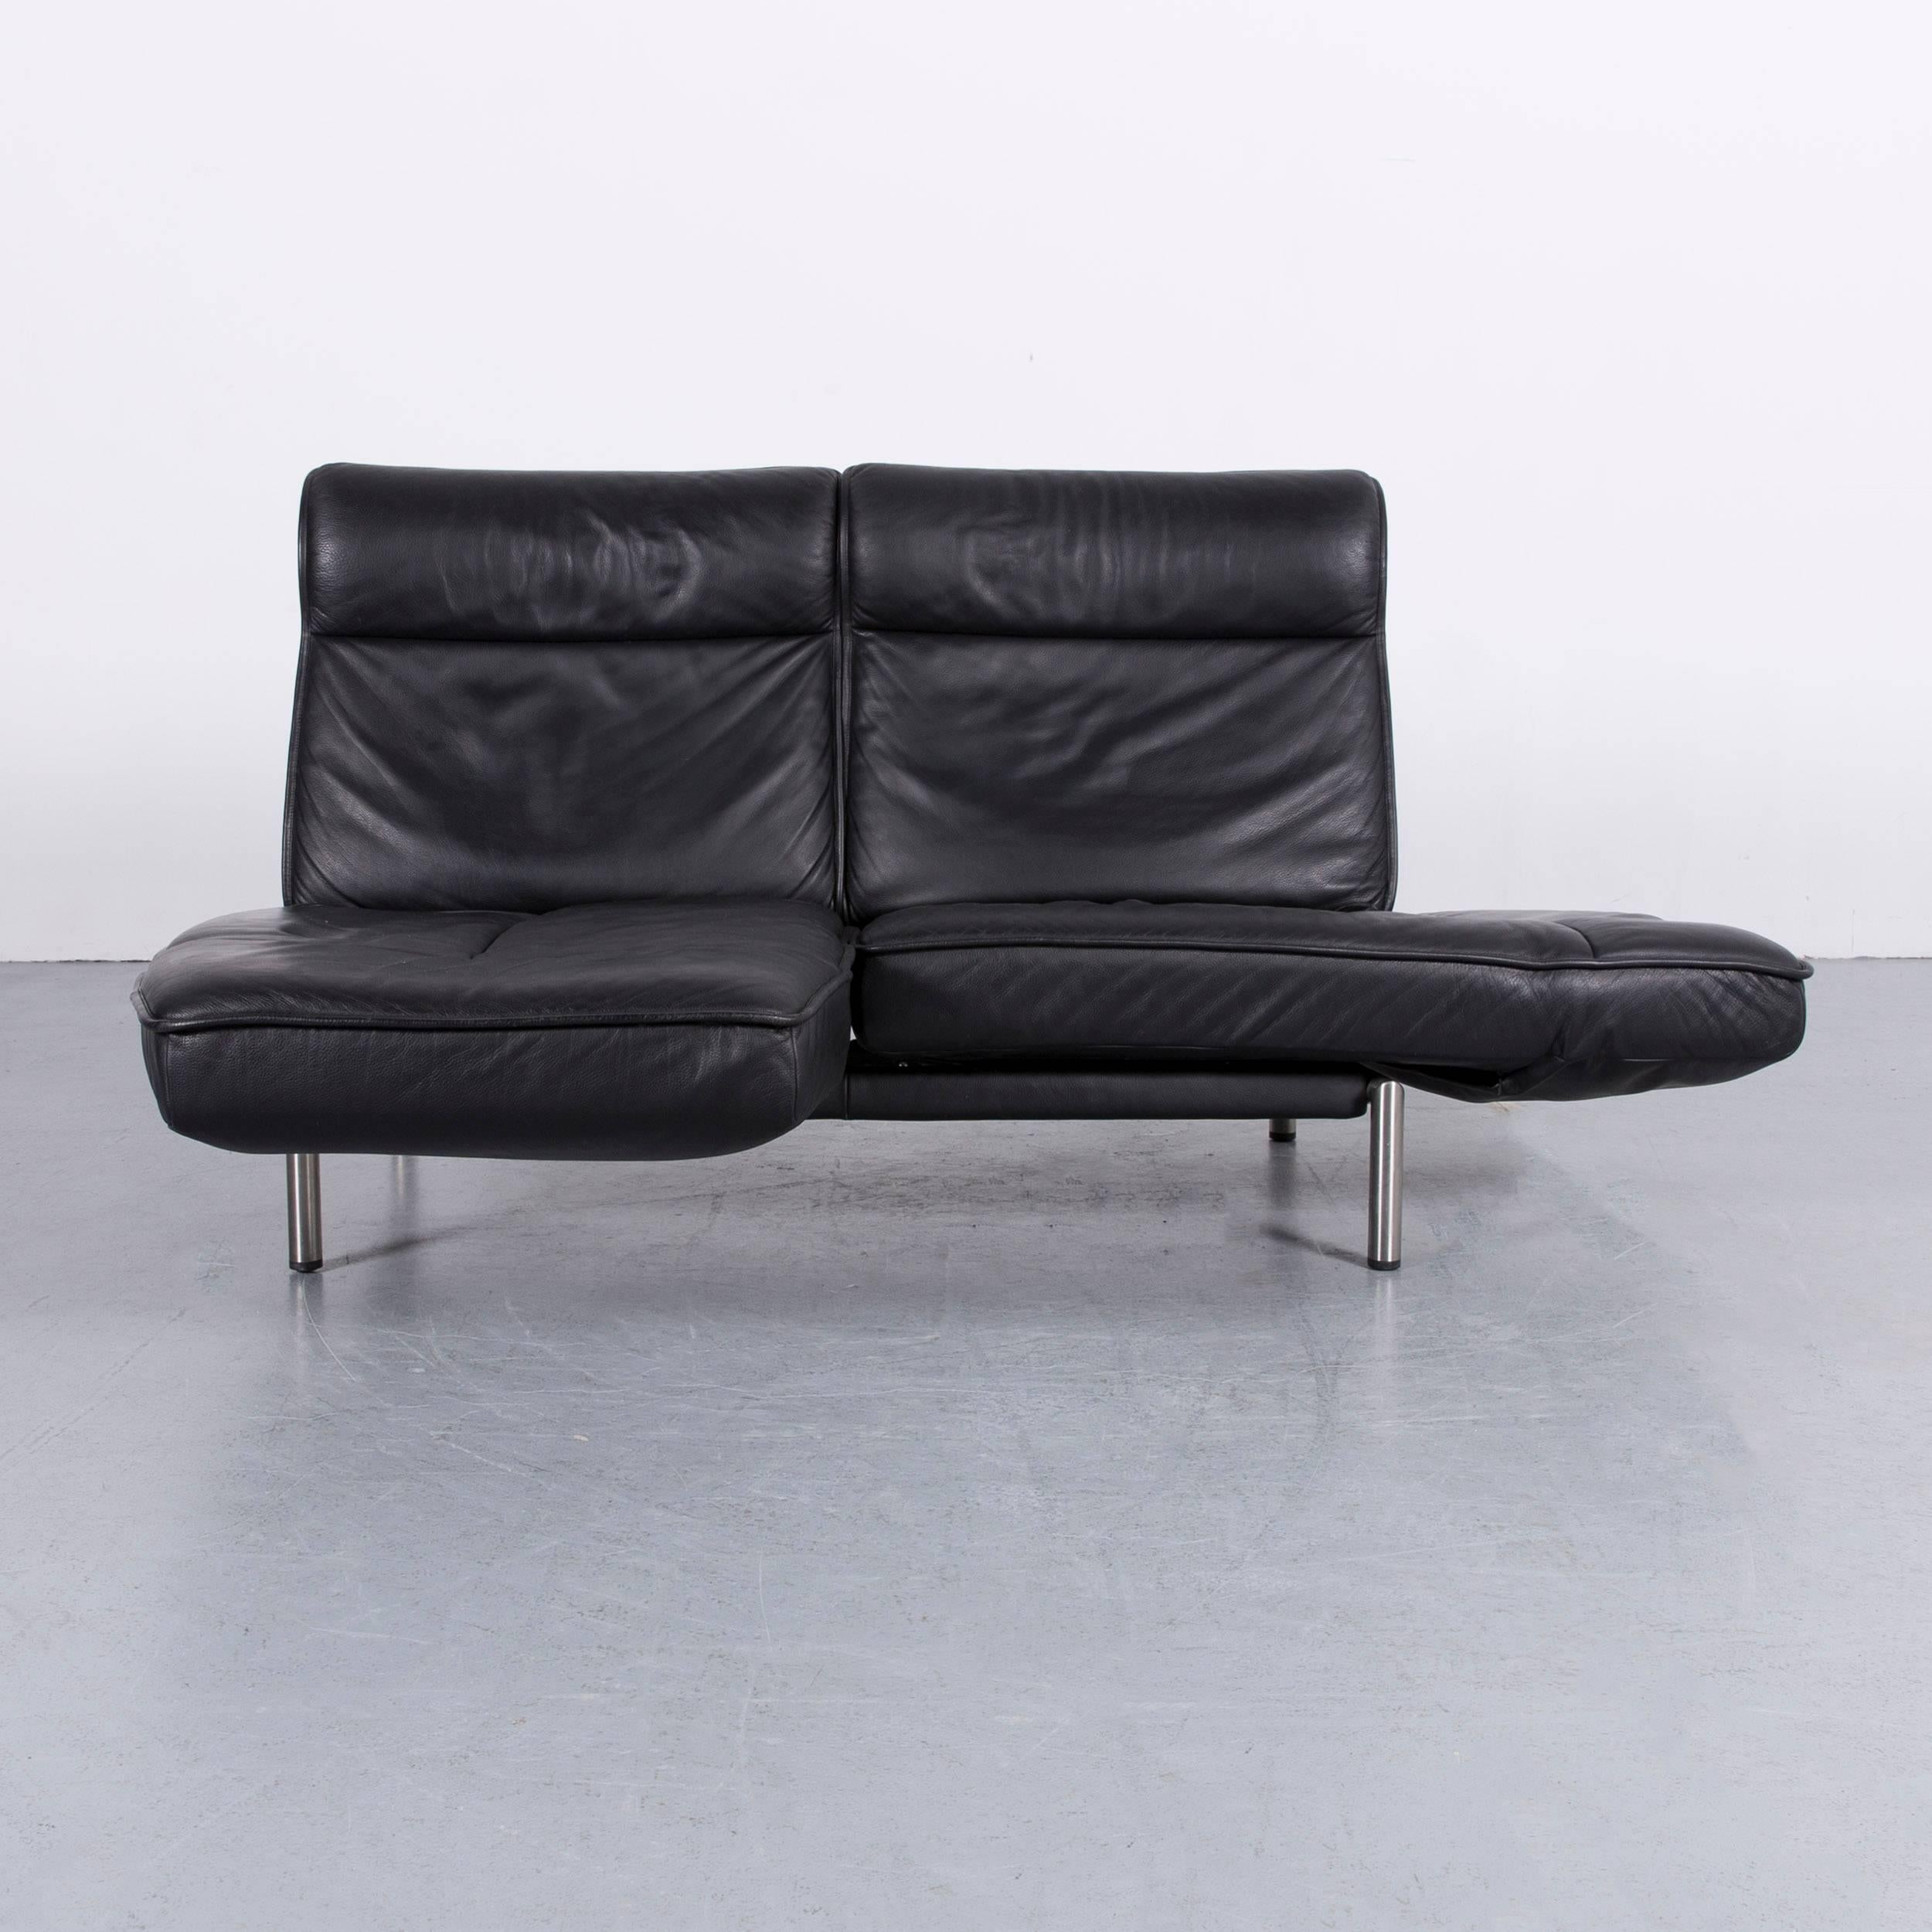 We bring to you an De Sede DS 450 designer sofa black leather two-seat couch.